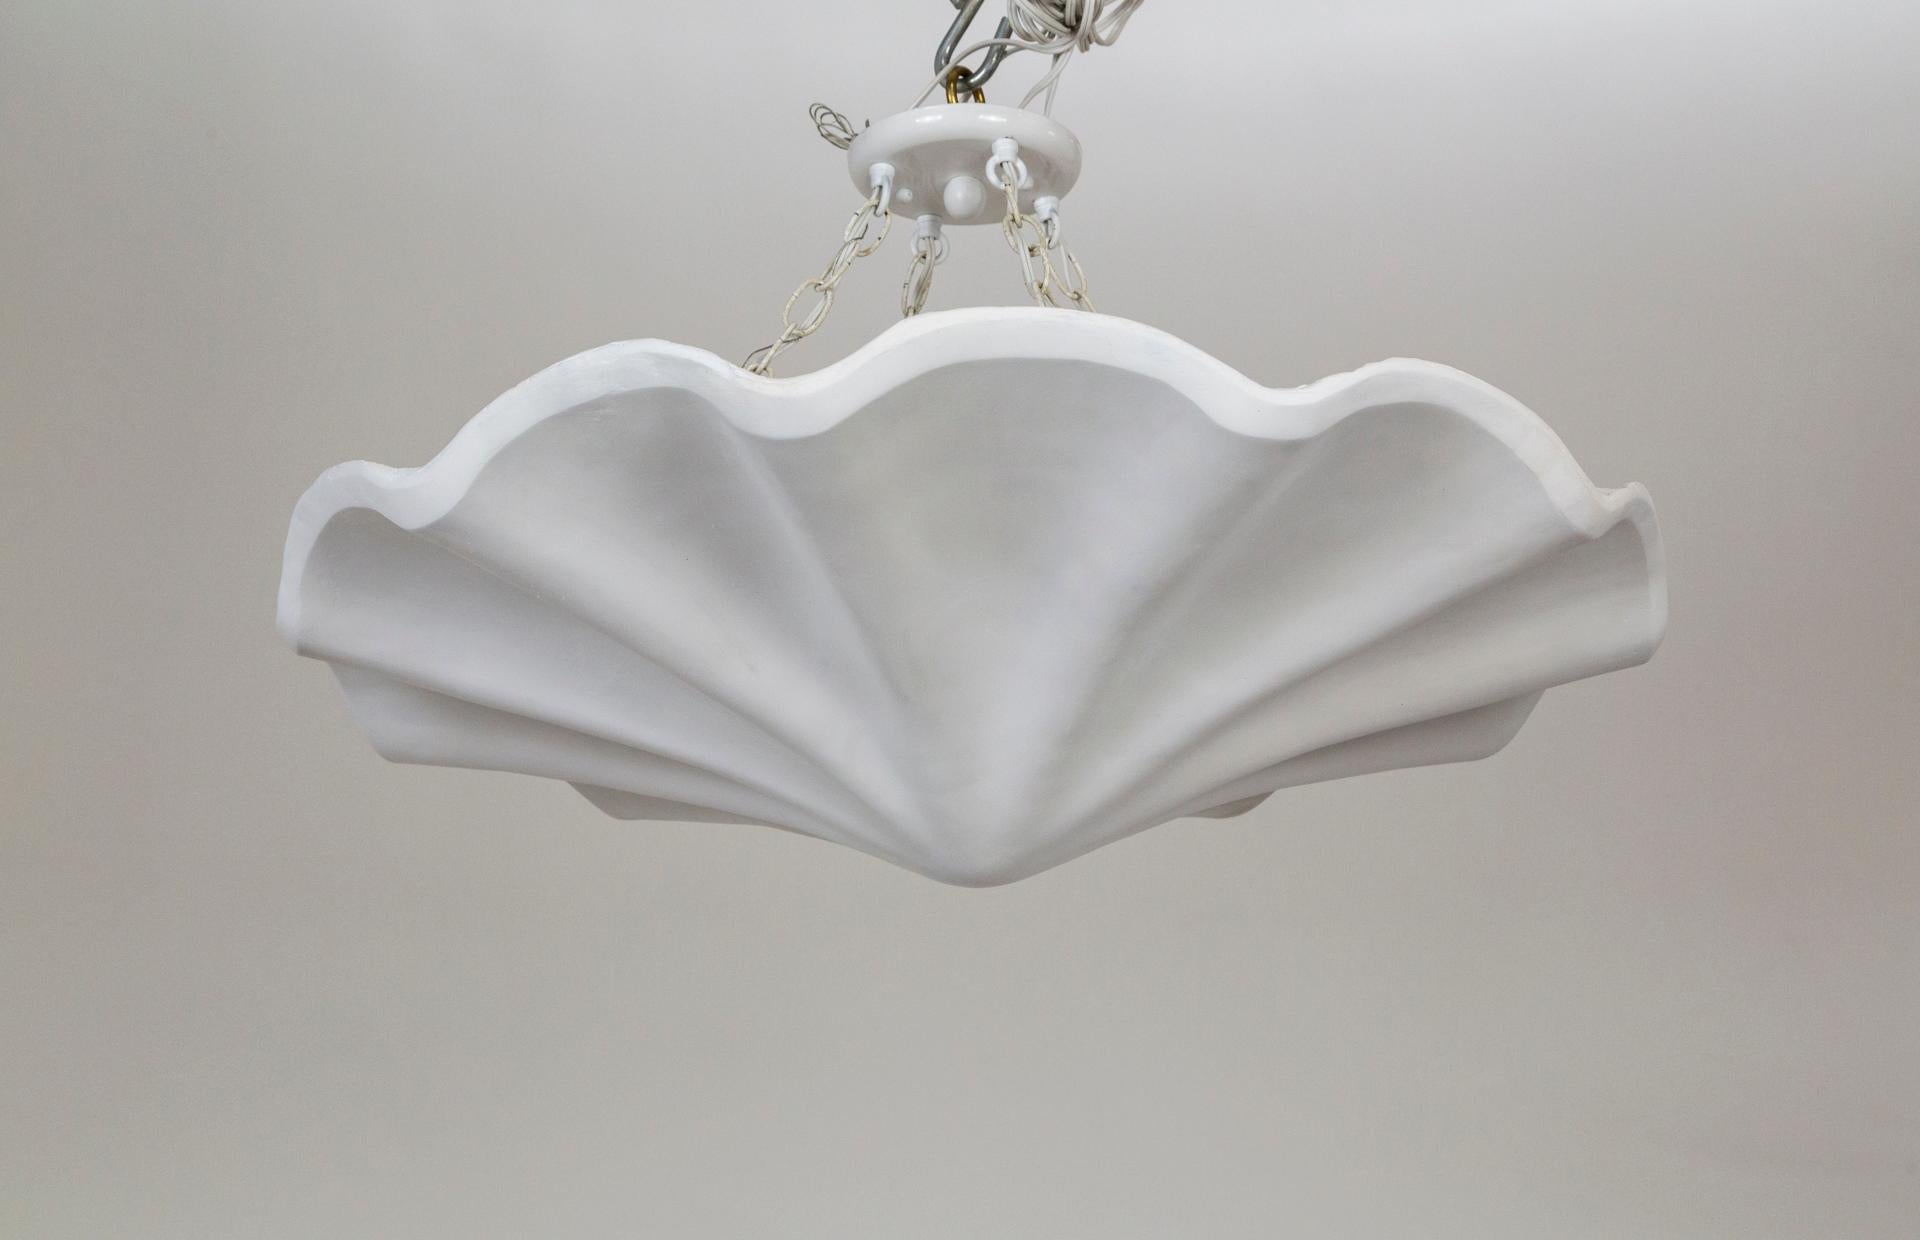 A plaster pendant in a smooth, undulating shell shape, with scalloped edges. A newer take on Francis Elkins's 1940s plaster plafonnier. Hanging by four white chains; with 3 medium base ceramic sockets.* Contemporary; made from an original mold. Made